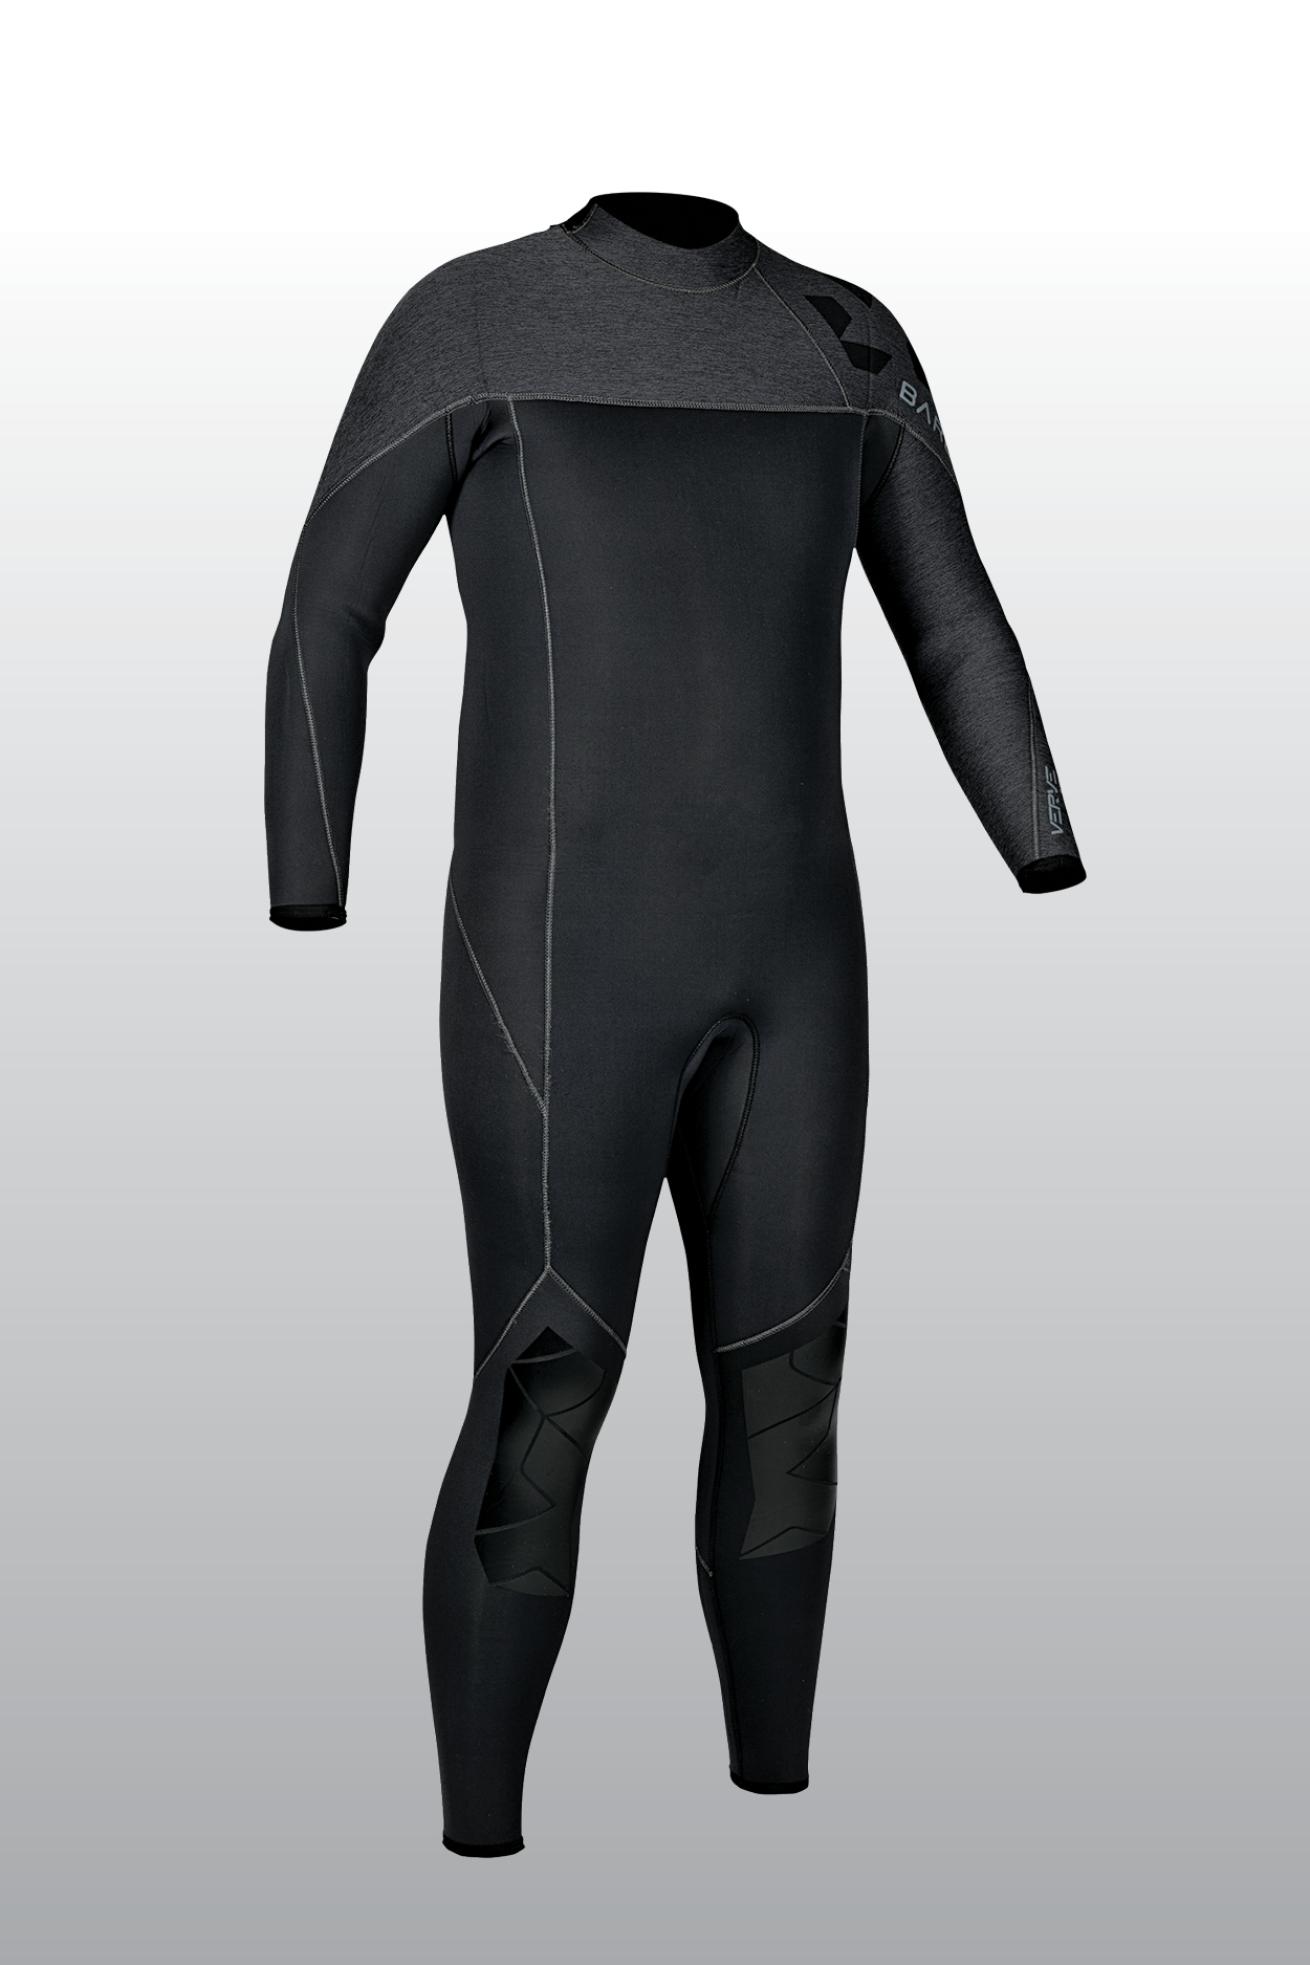 Owntop Wetsuit 5mm Neoprene Diving Suit - Mens Womens Thicken Full Wet  Suit, Front Zip Long Sleeve UPF50+ Keep Warm Swimwear for Scuba Surfing